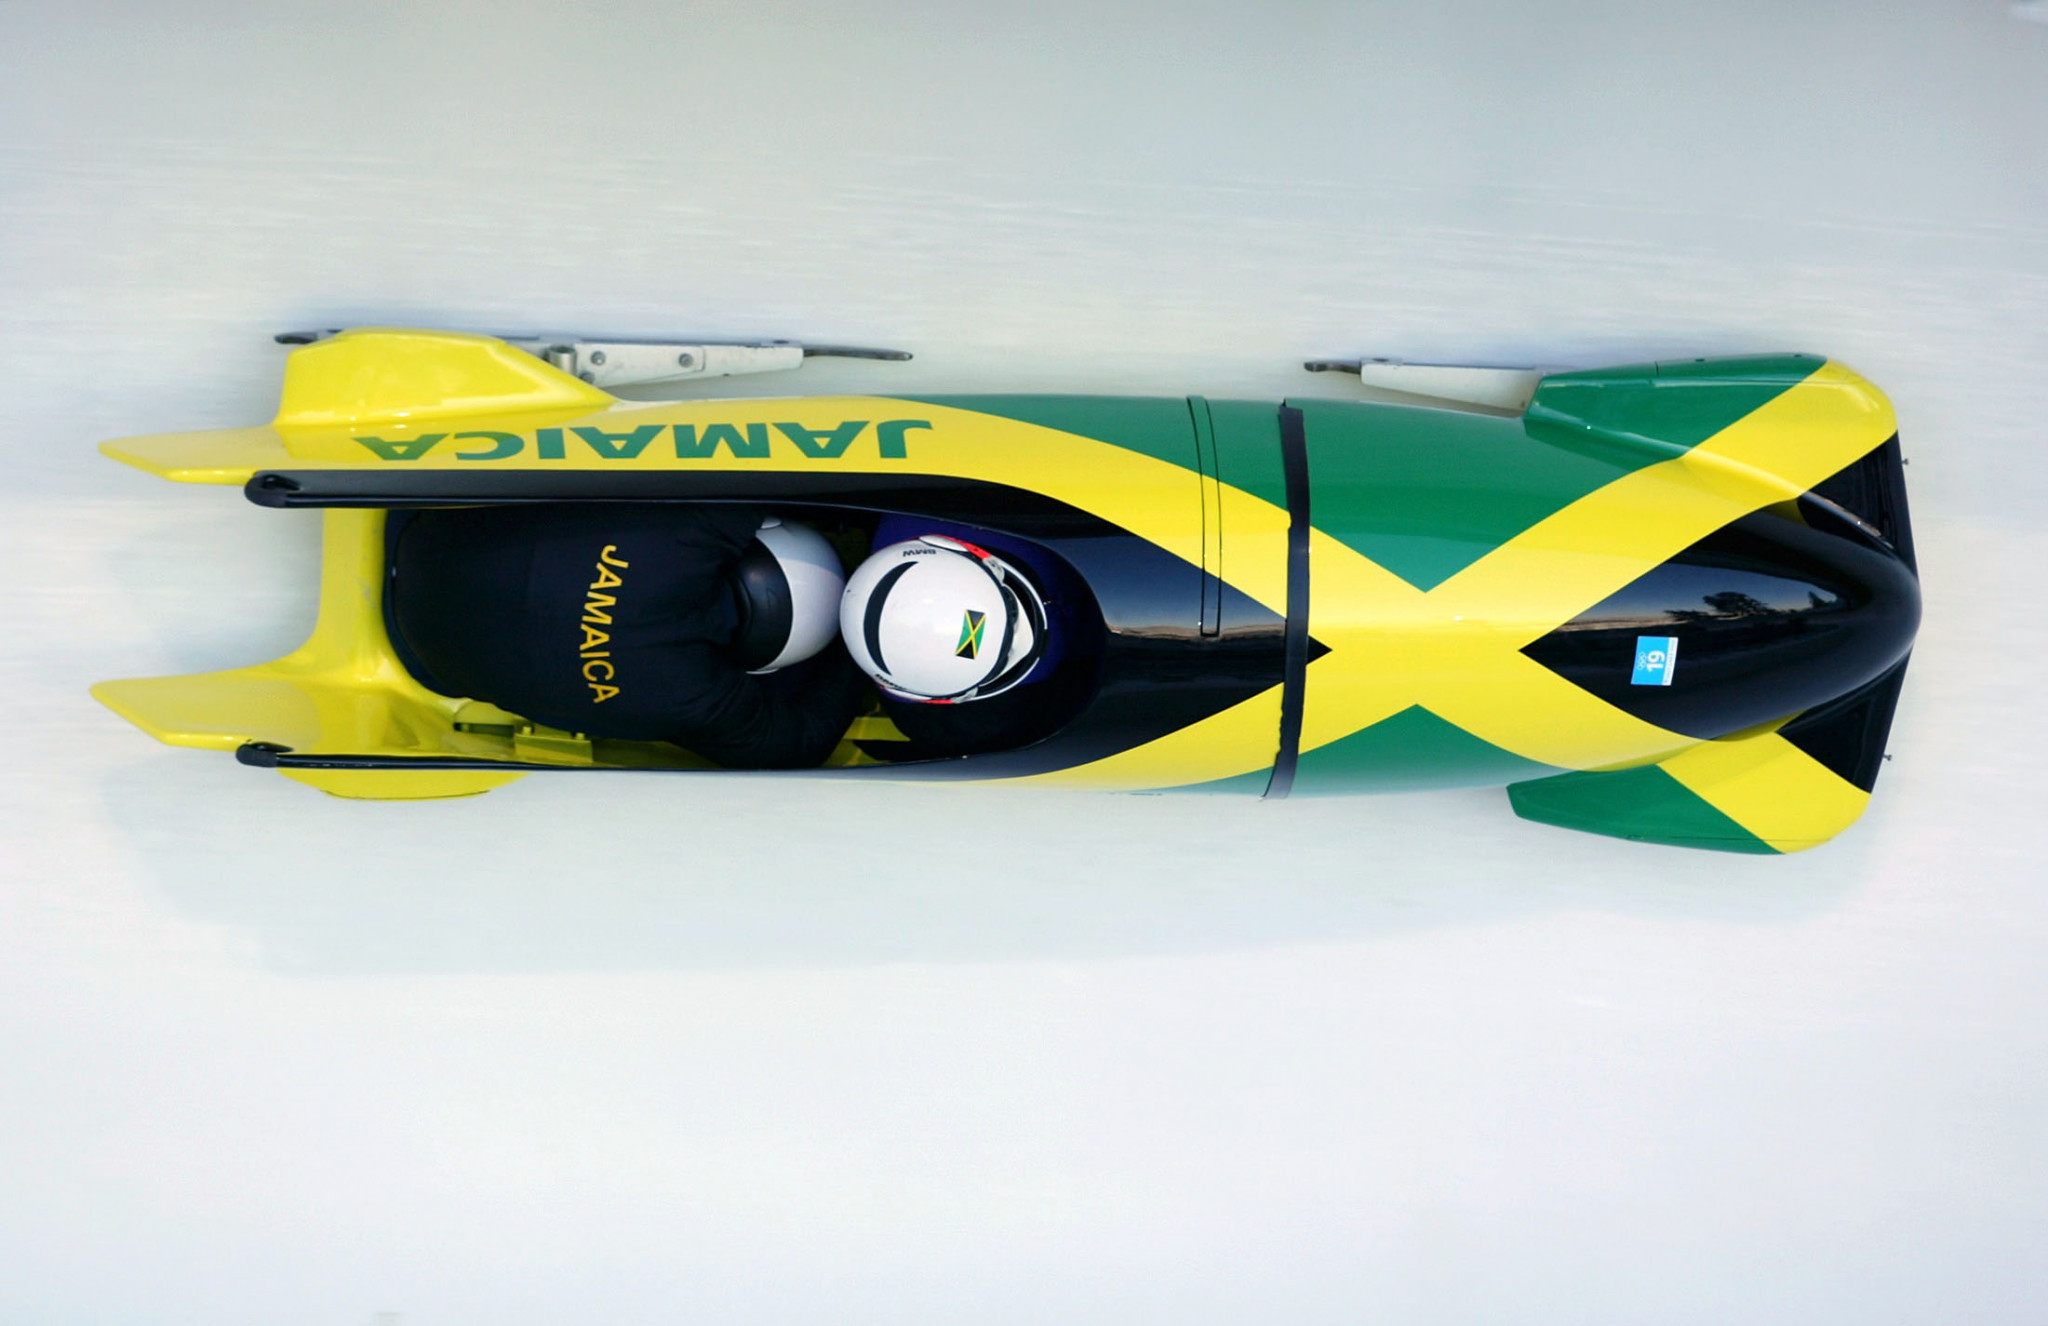 Popongo has been named as the official sponsor of the Jamaican bobsleigh team for Beijing 2022 ©Getty Images